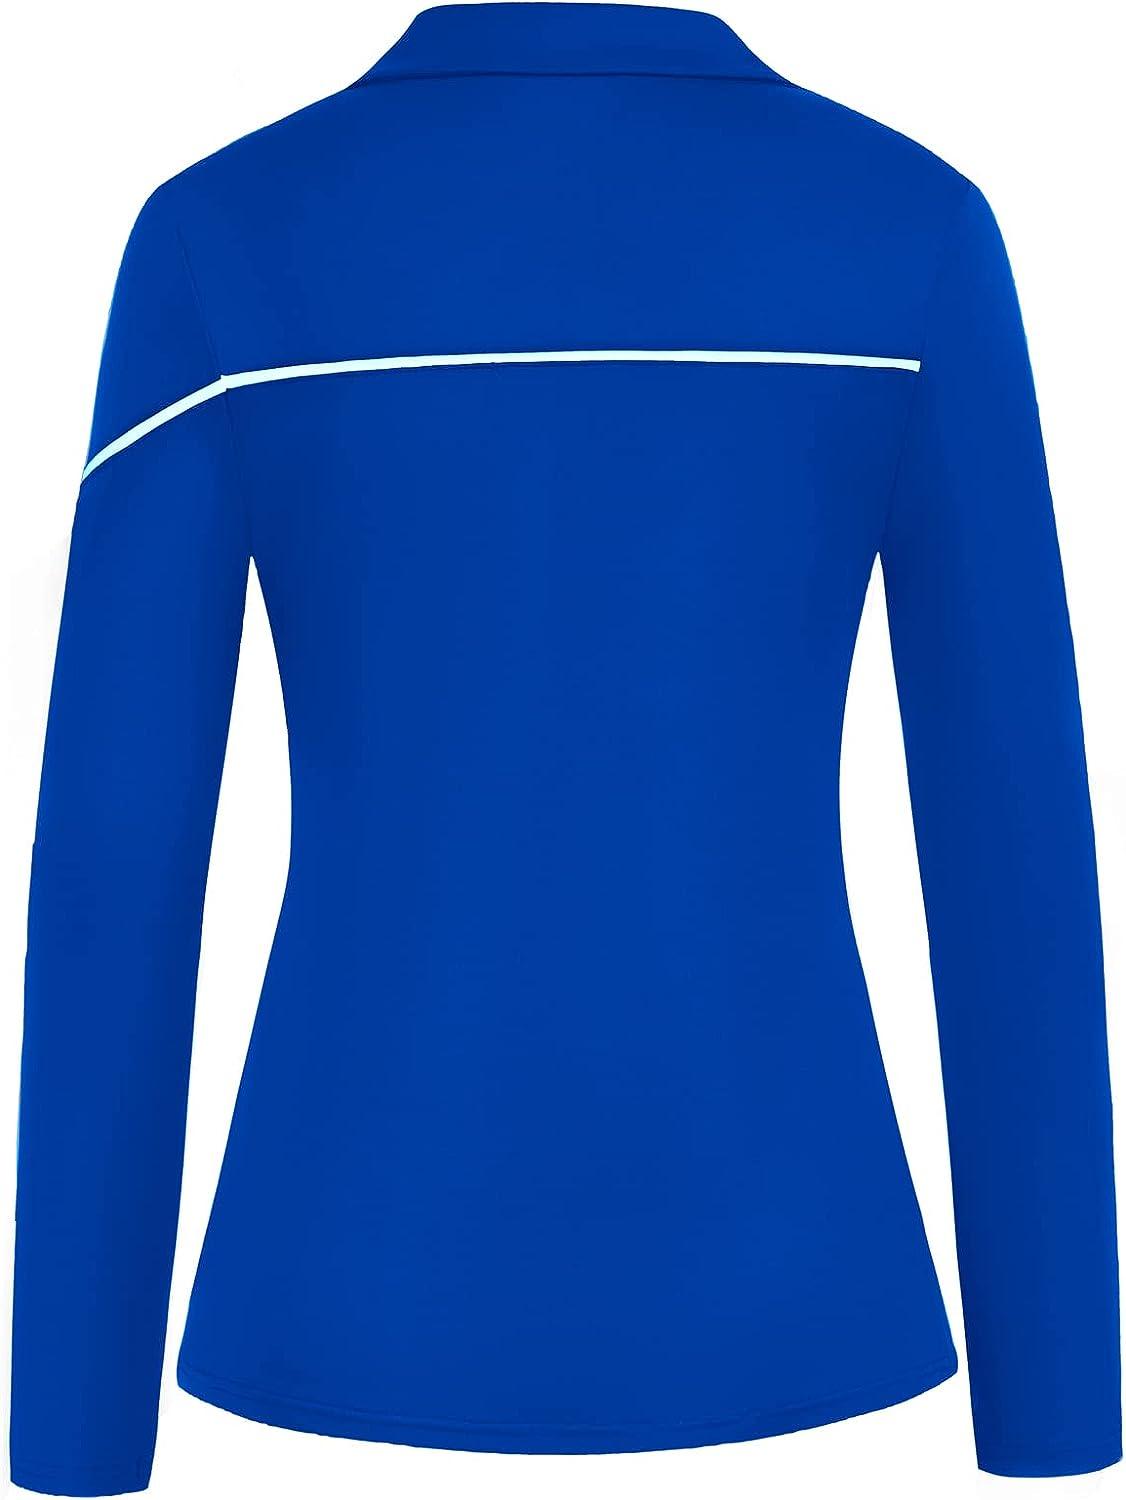 JACK SMITH Women Golf Polo Shirts Dry Fit UPF 50+ Long Sleeve Tennis Tops  Zip Up Slim Fit Athletic Shirt with Tee Holder Royal Blue X-Large